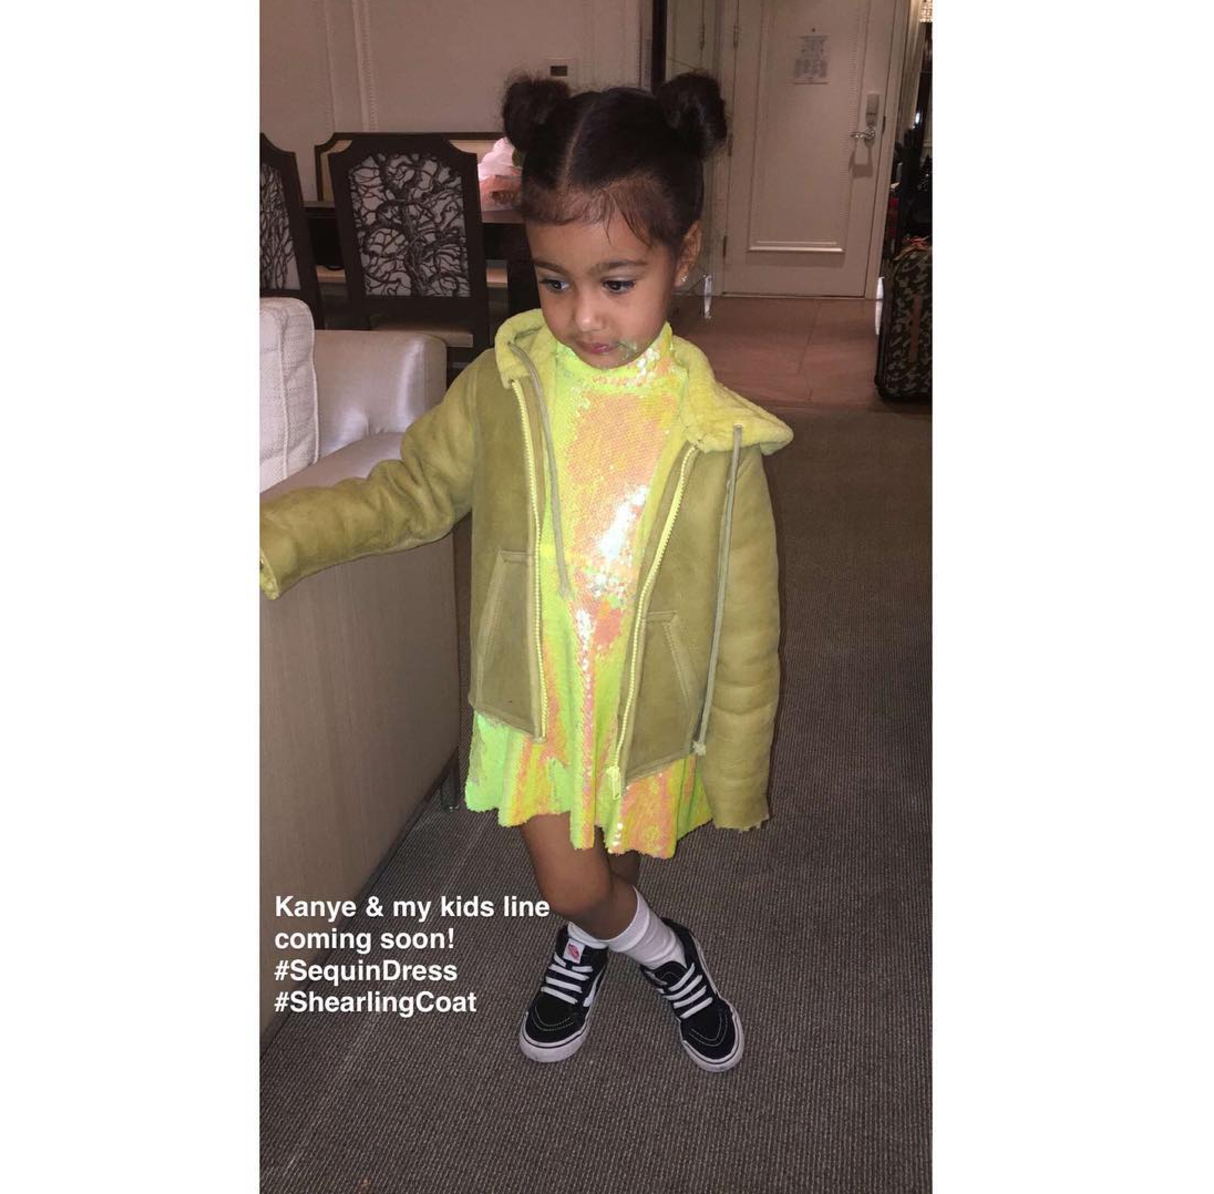 Kanye West And Kim Kardashian West Will Be Releasing A Kids Clothing Line